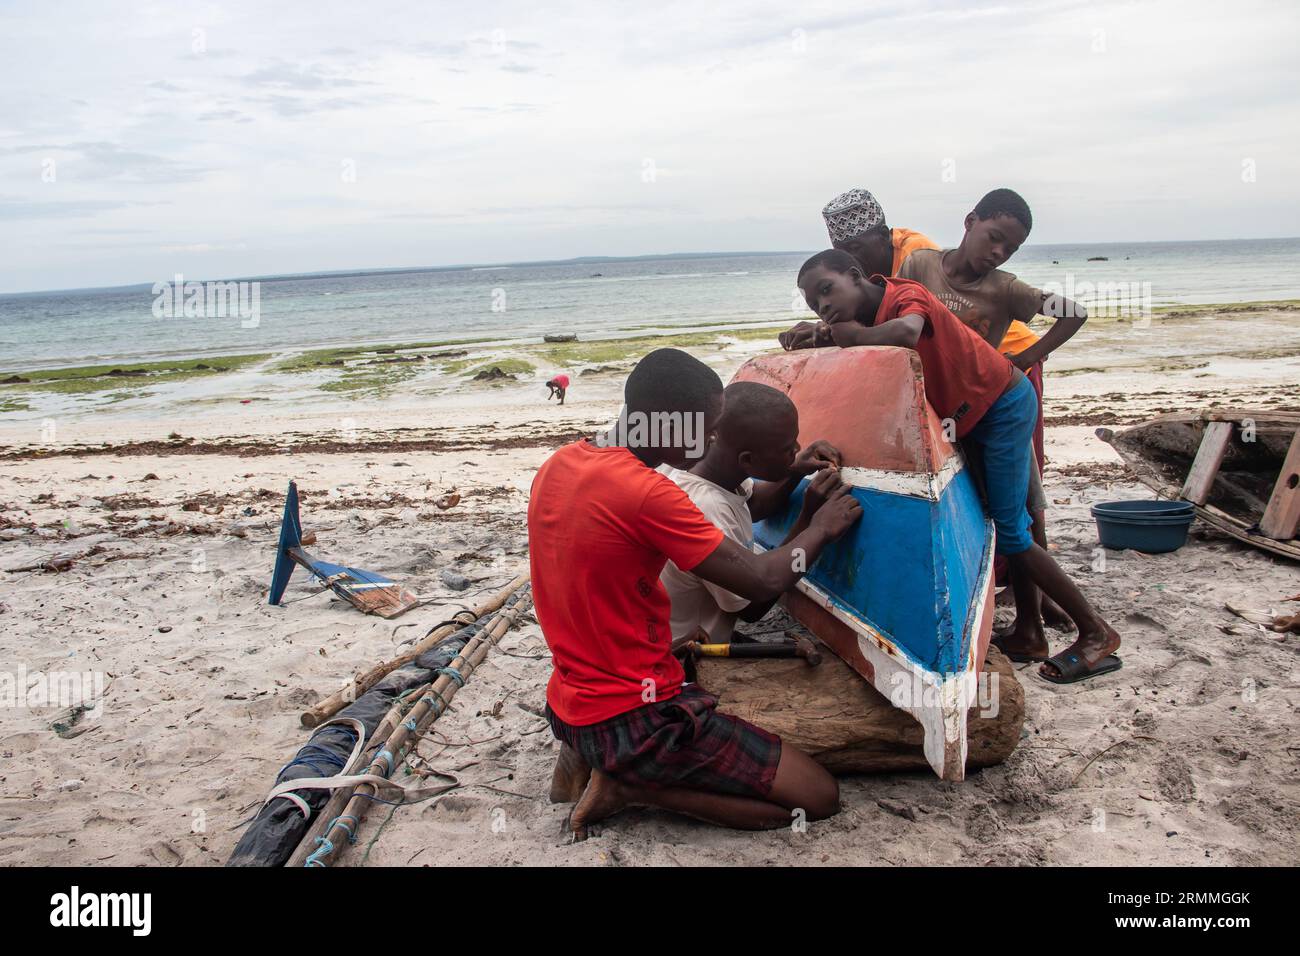 Group of African people fixing and maintaining fisherman's colorful wooden boat, at the shore of Indian Ocean. Bunch of curious kids wondering around Stock Photo